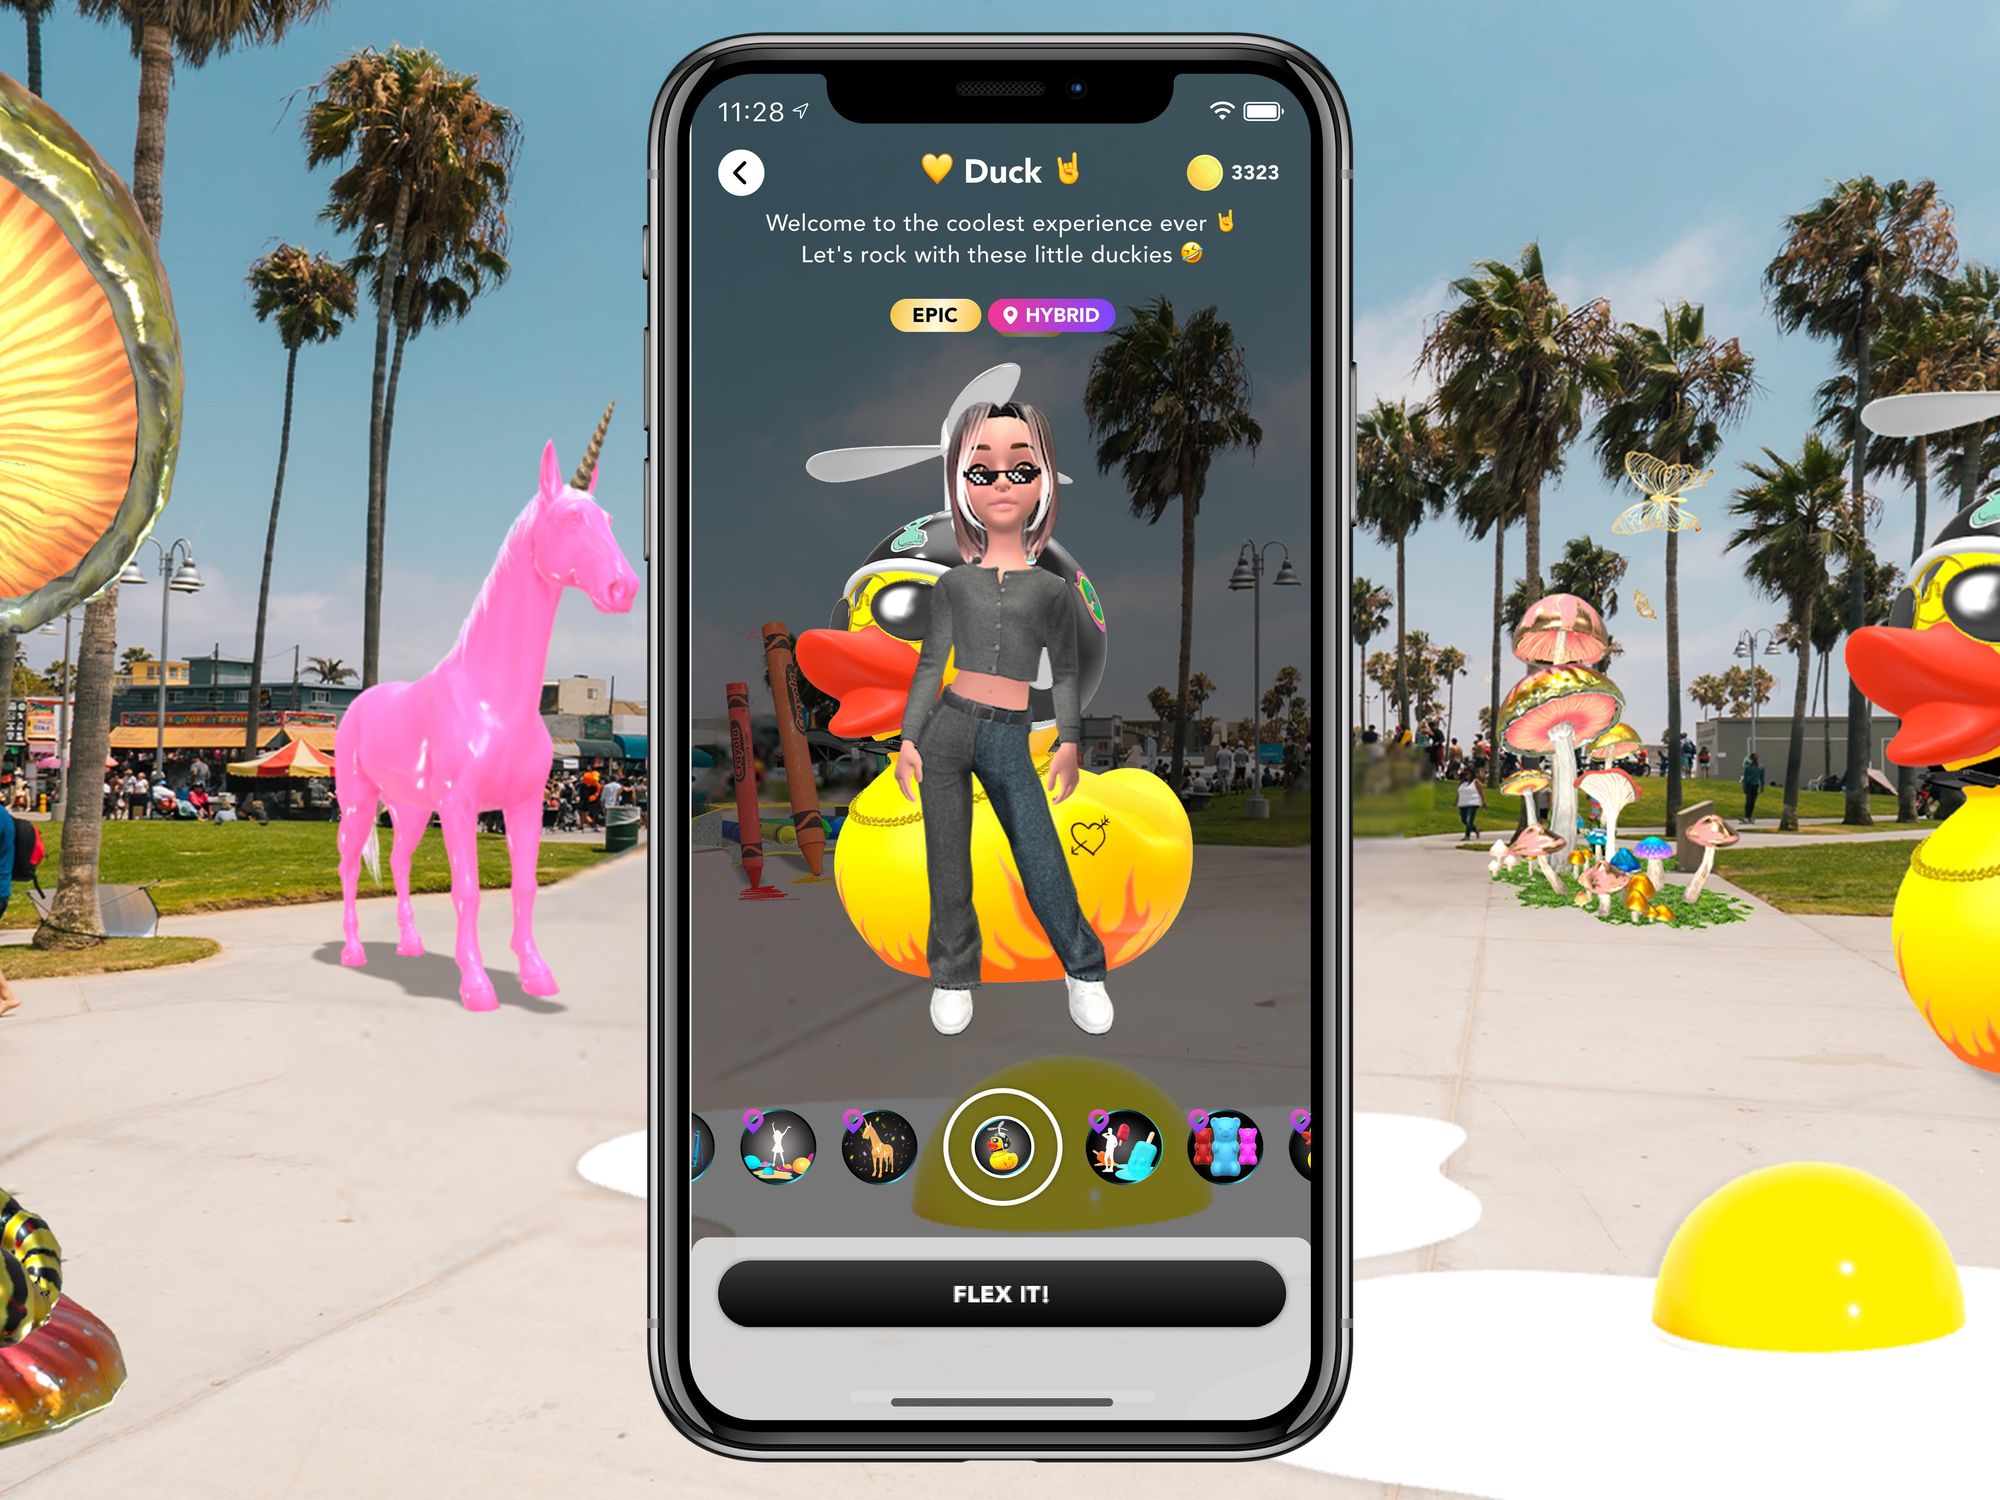 Santa Monica Is Using the Metaverse to Gamify Its Shopping District